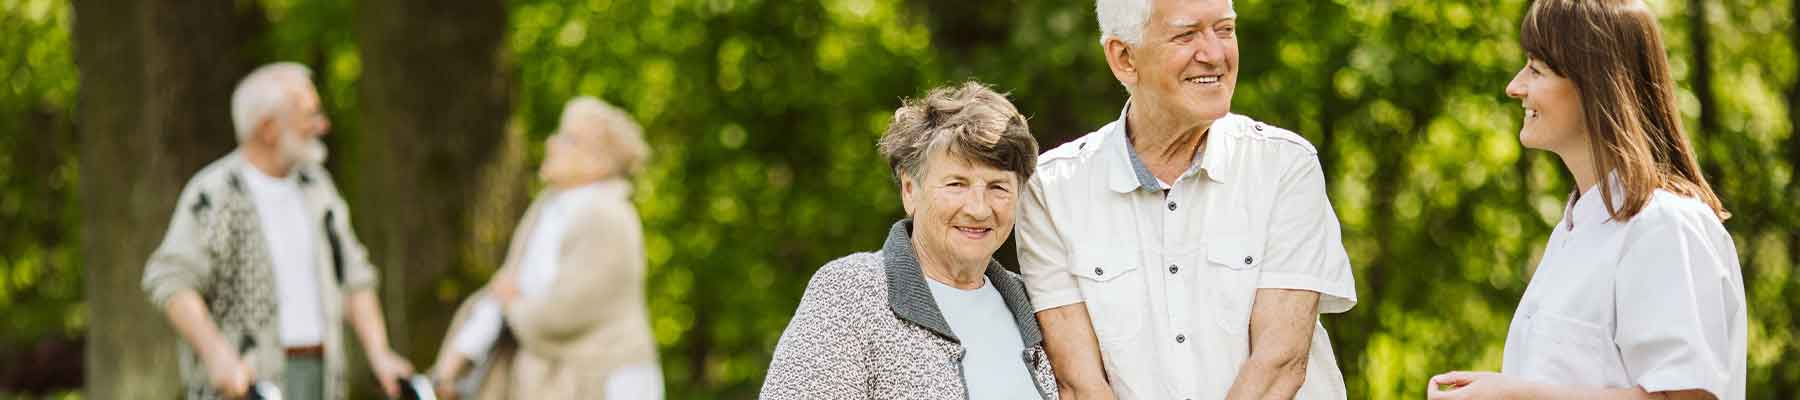 Schedule a Free Home Care Consultation for Your Loved One’s Comfort and Well-Being